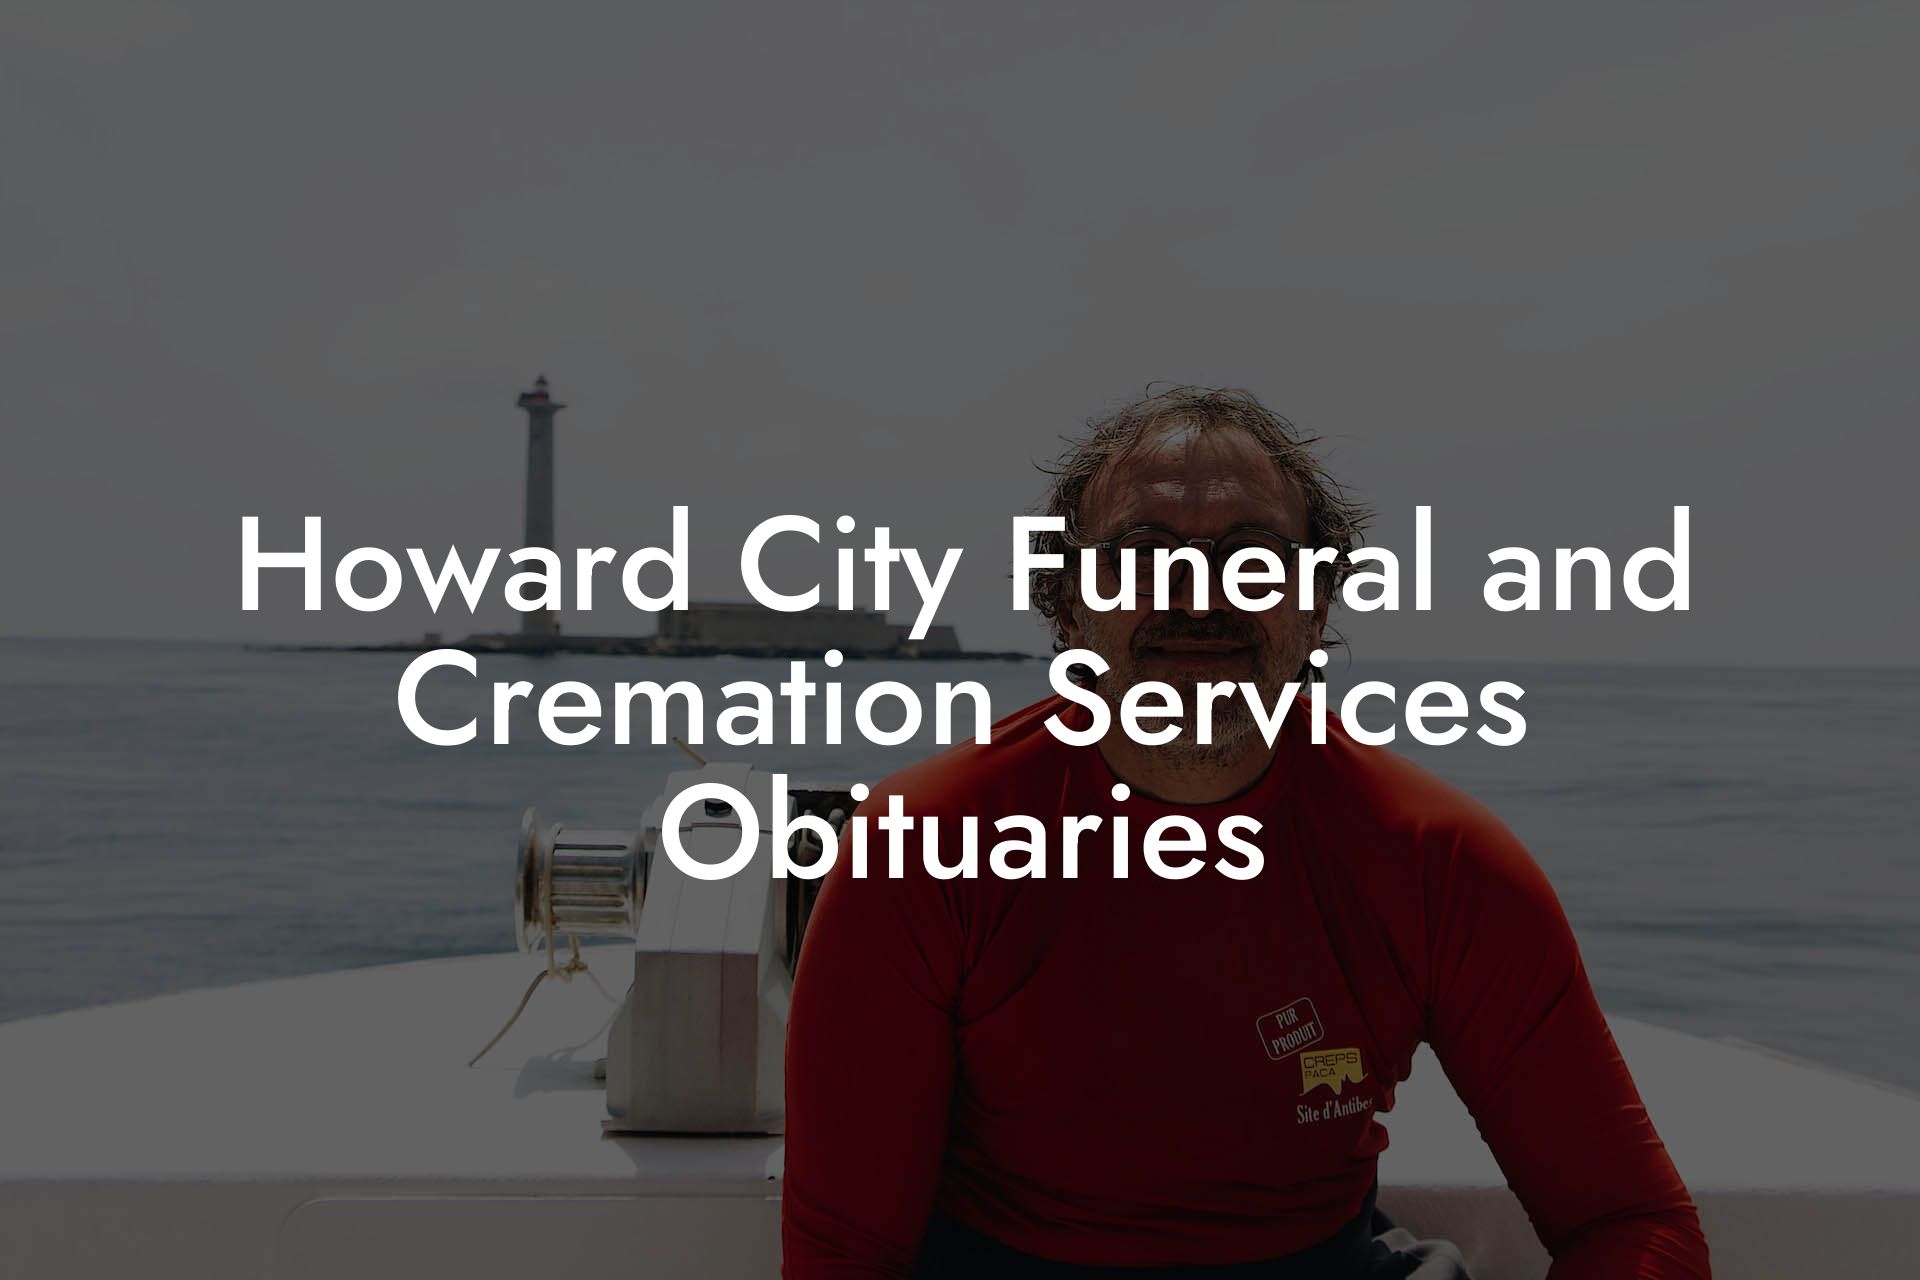 Howard City Funeral and Cremation Services Obituaries